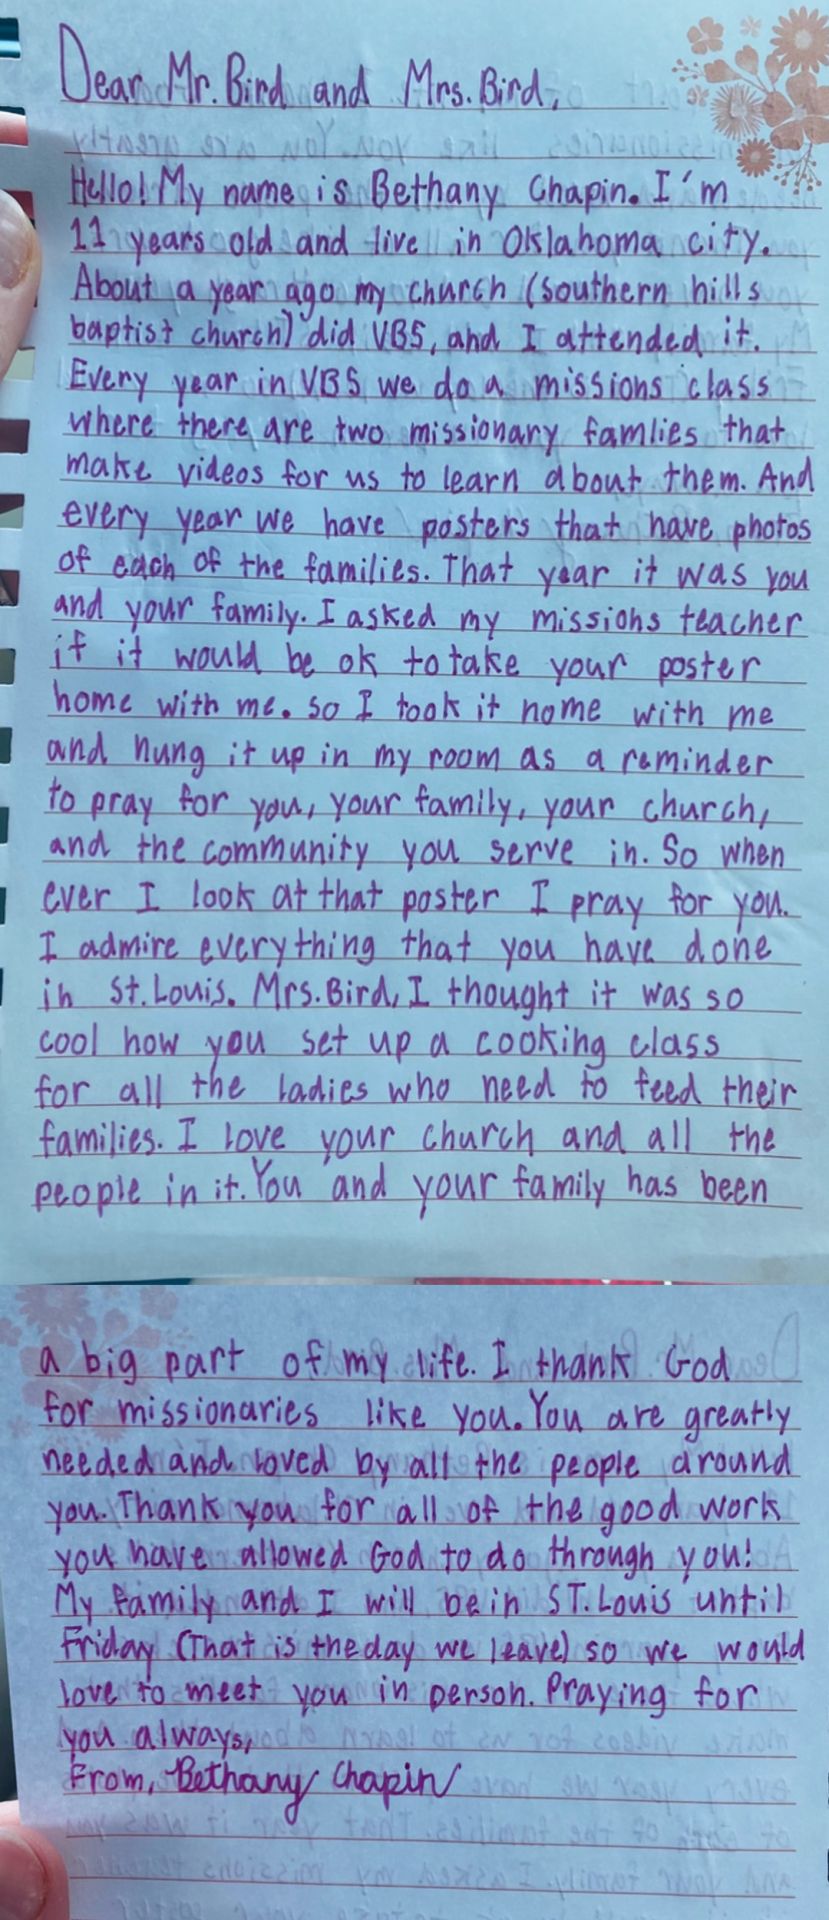 Bethany's letter to the Byrd family.